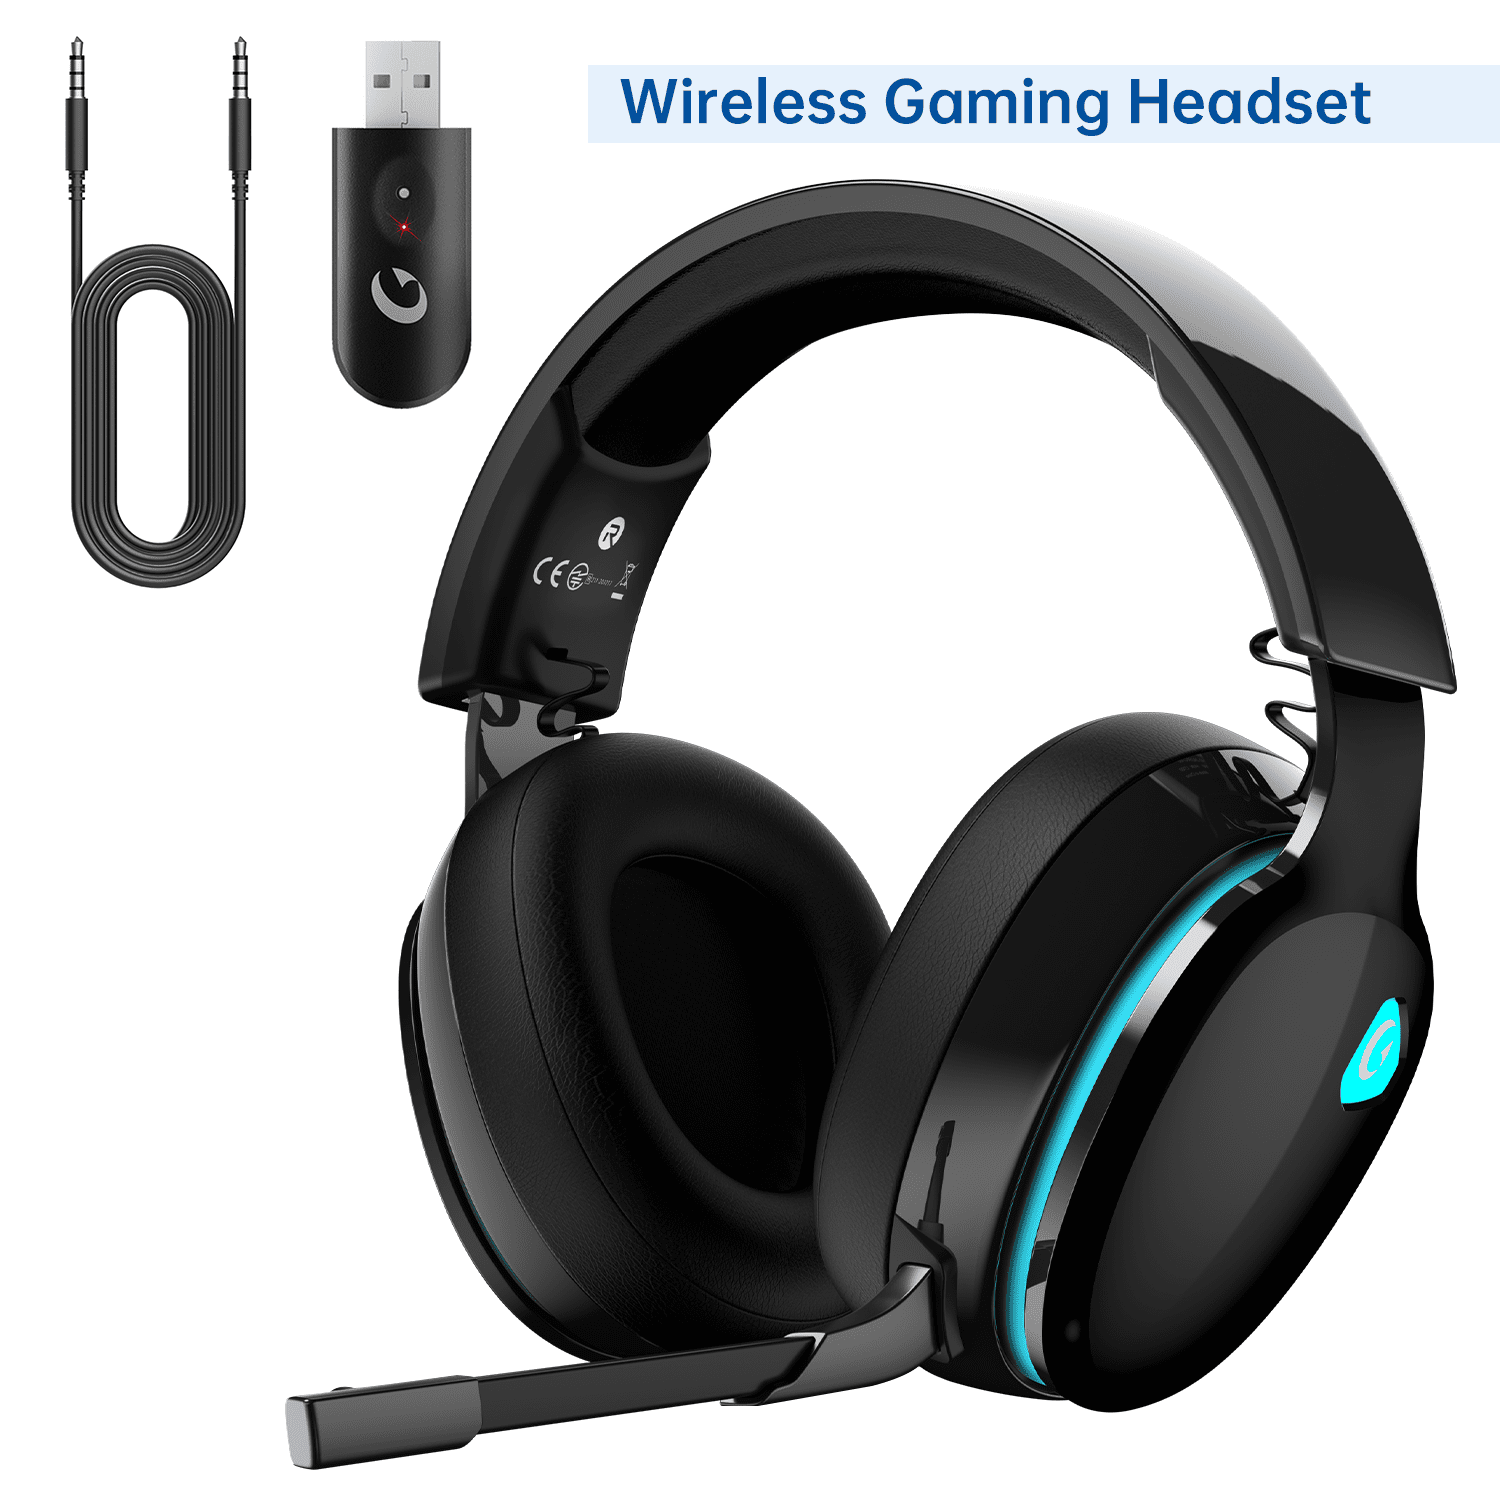 Astro A20 Wireless Gaming Headset For Xbox one/PC/Mac